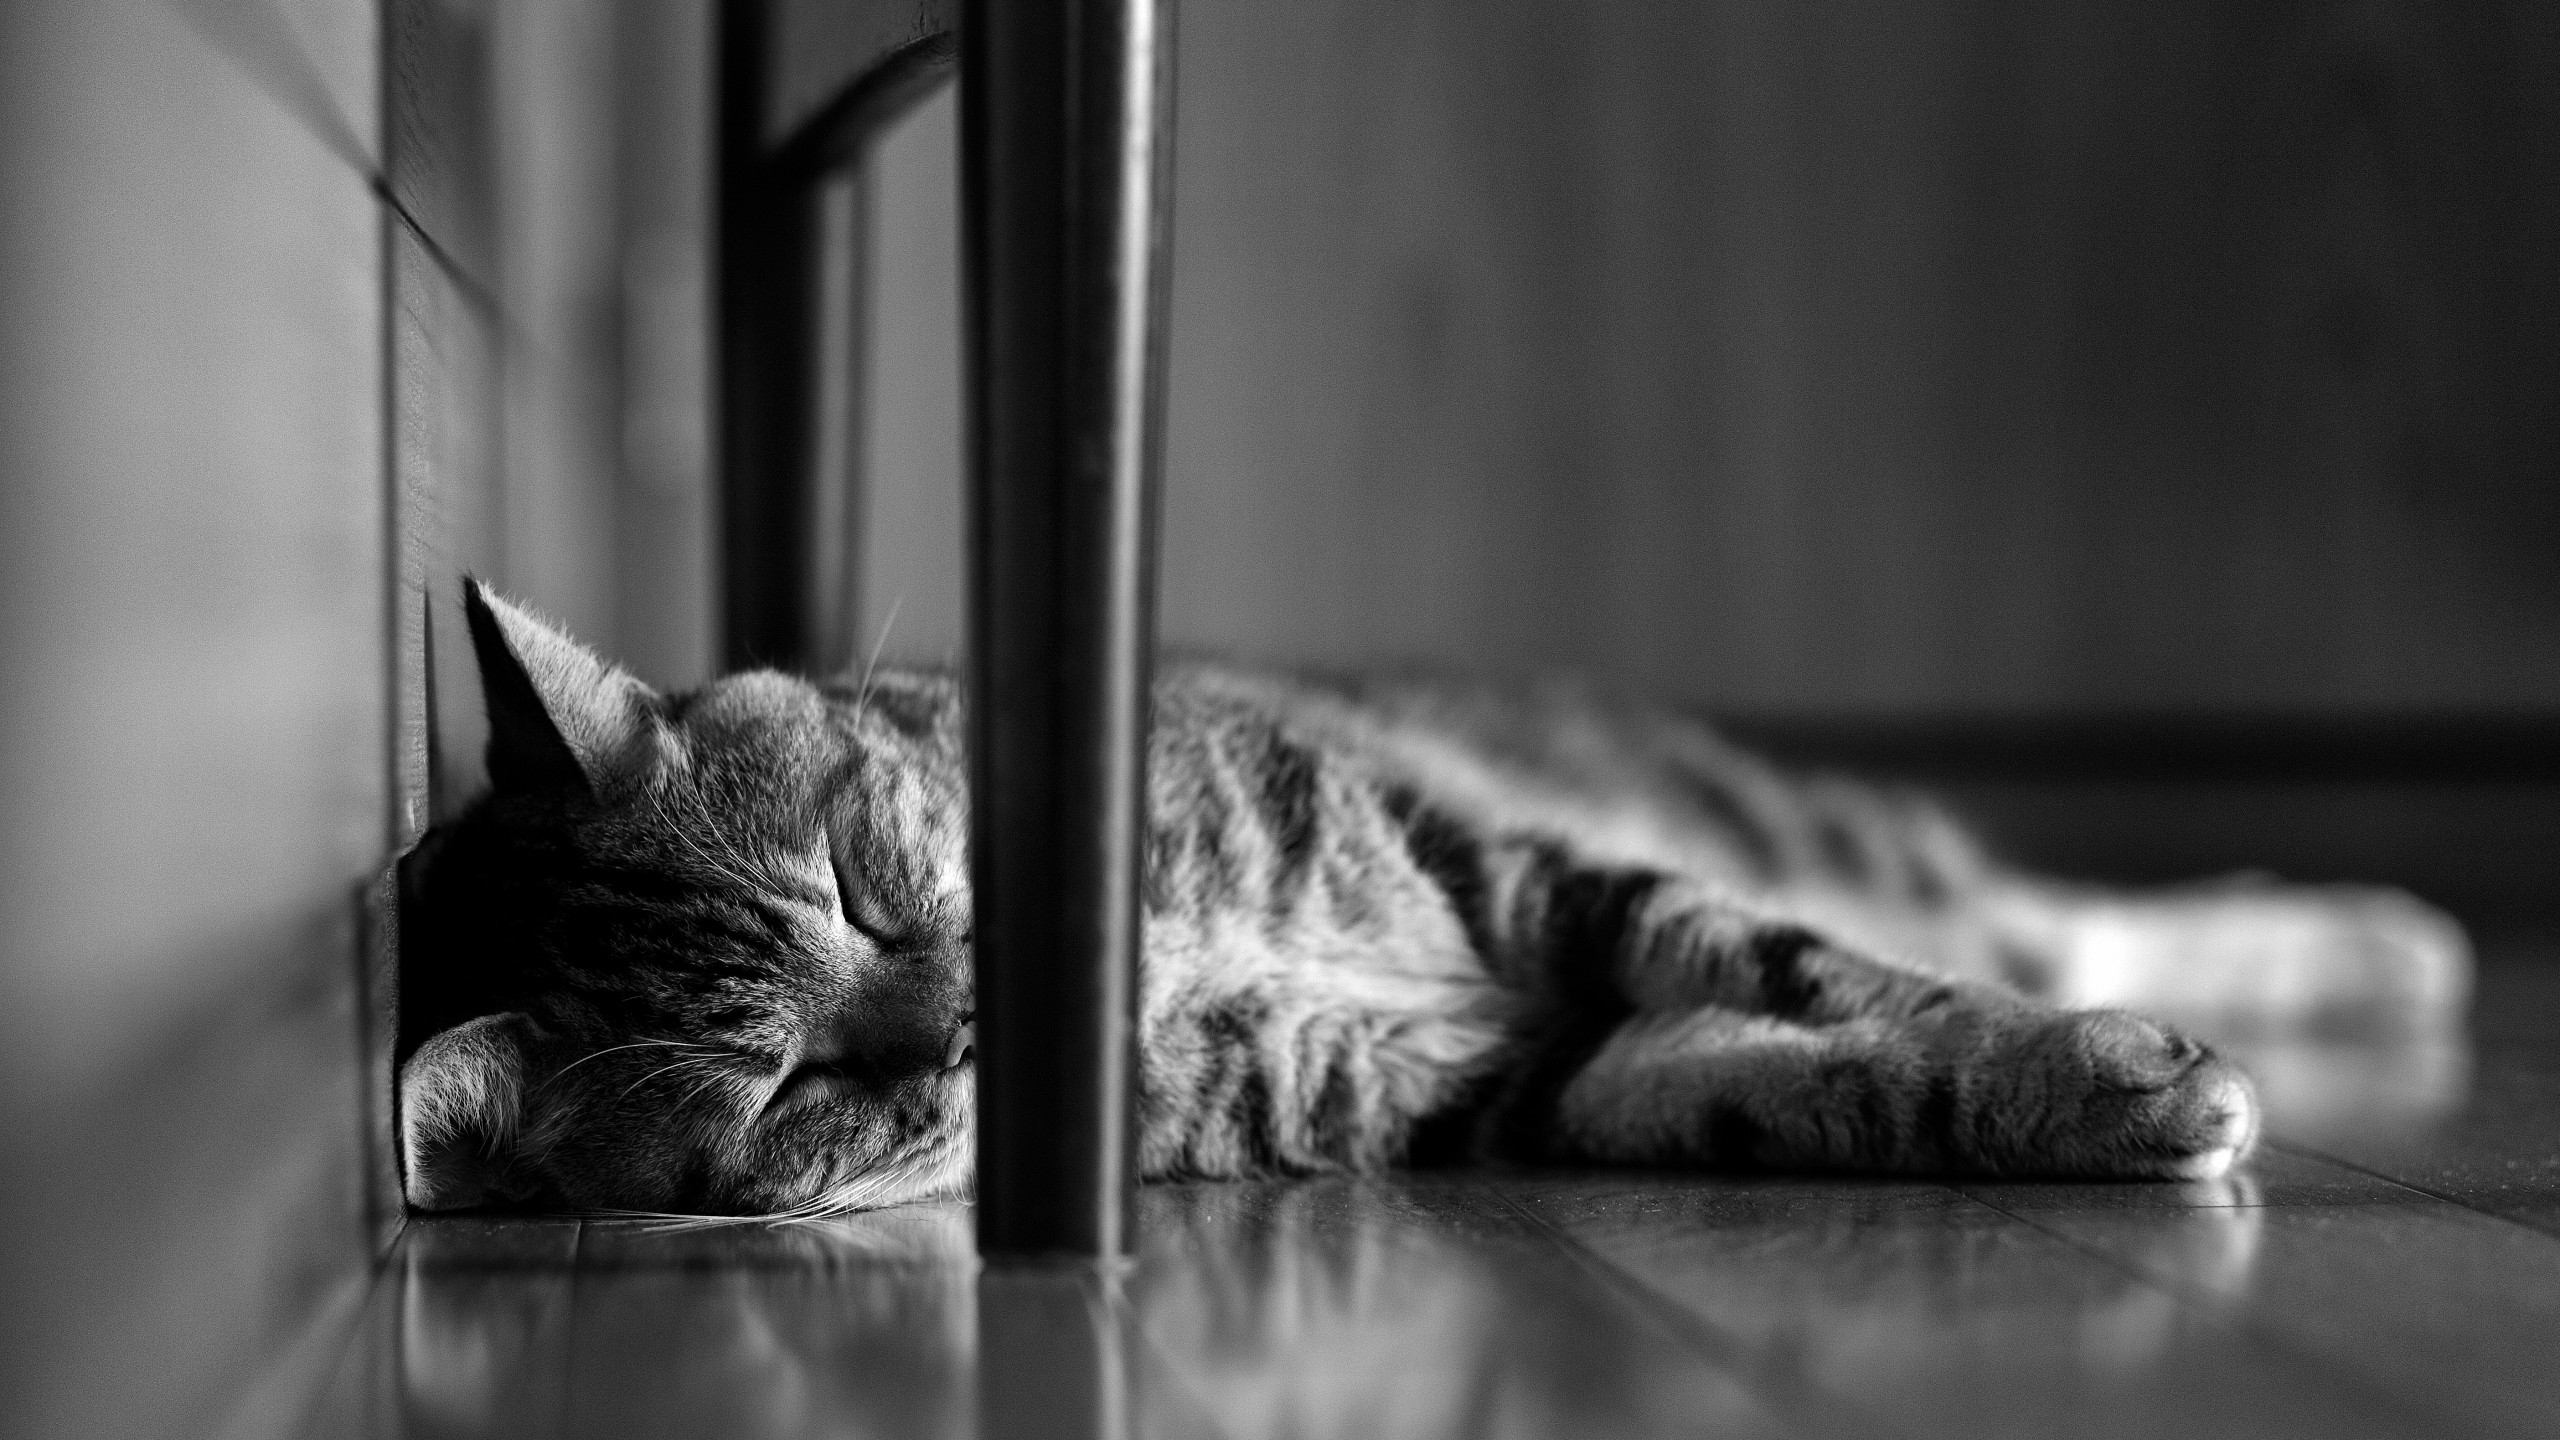 Lazy Cat for 2560x1440 HDTV resolution